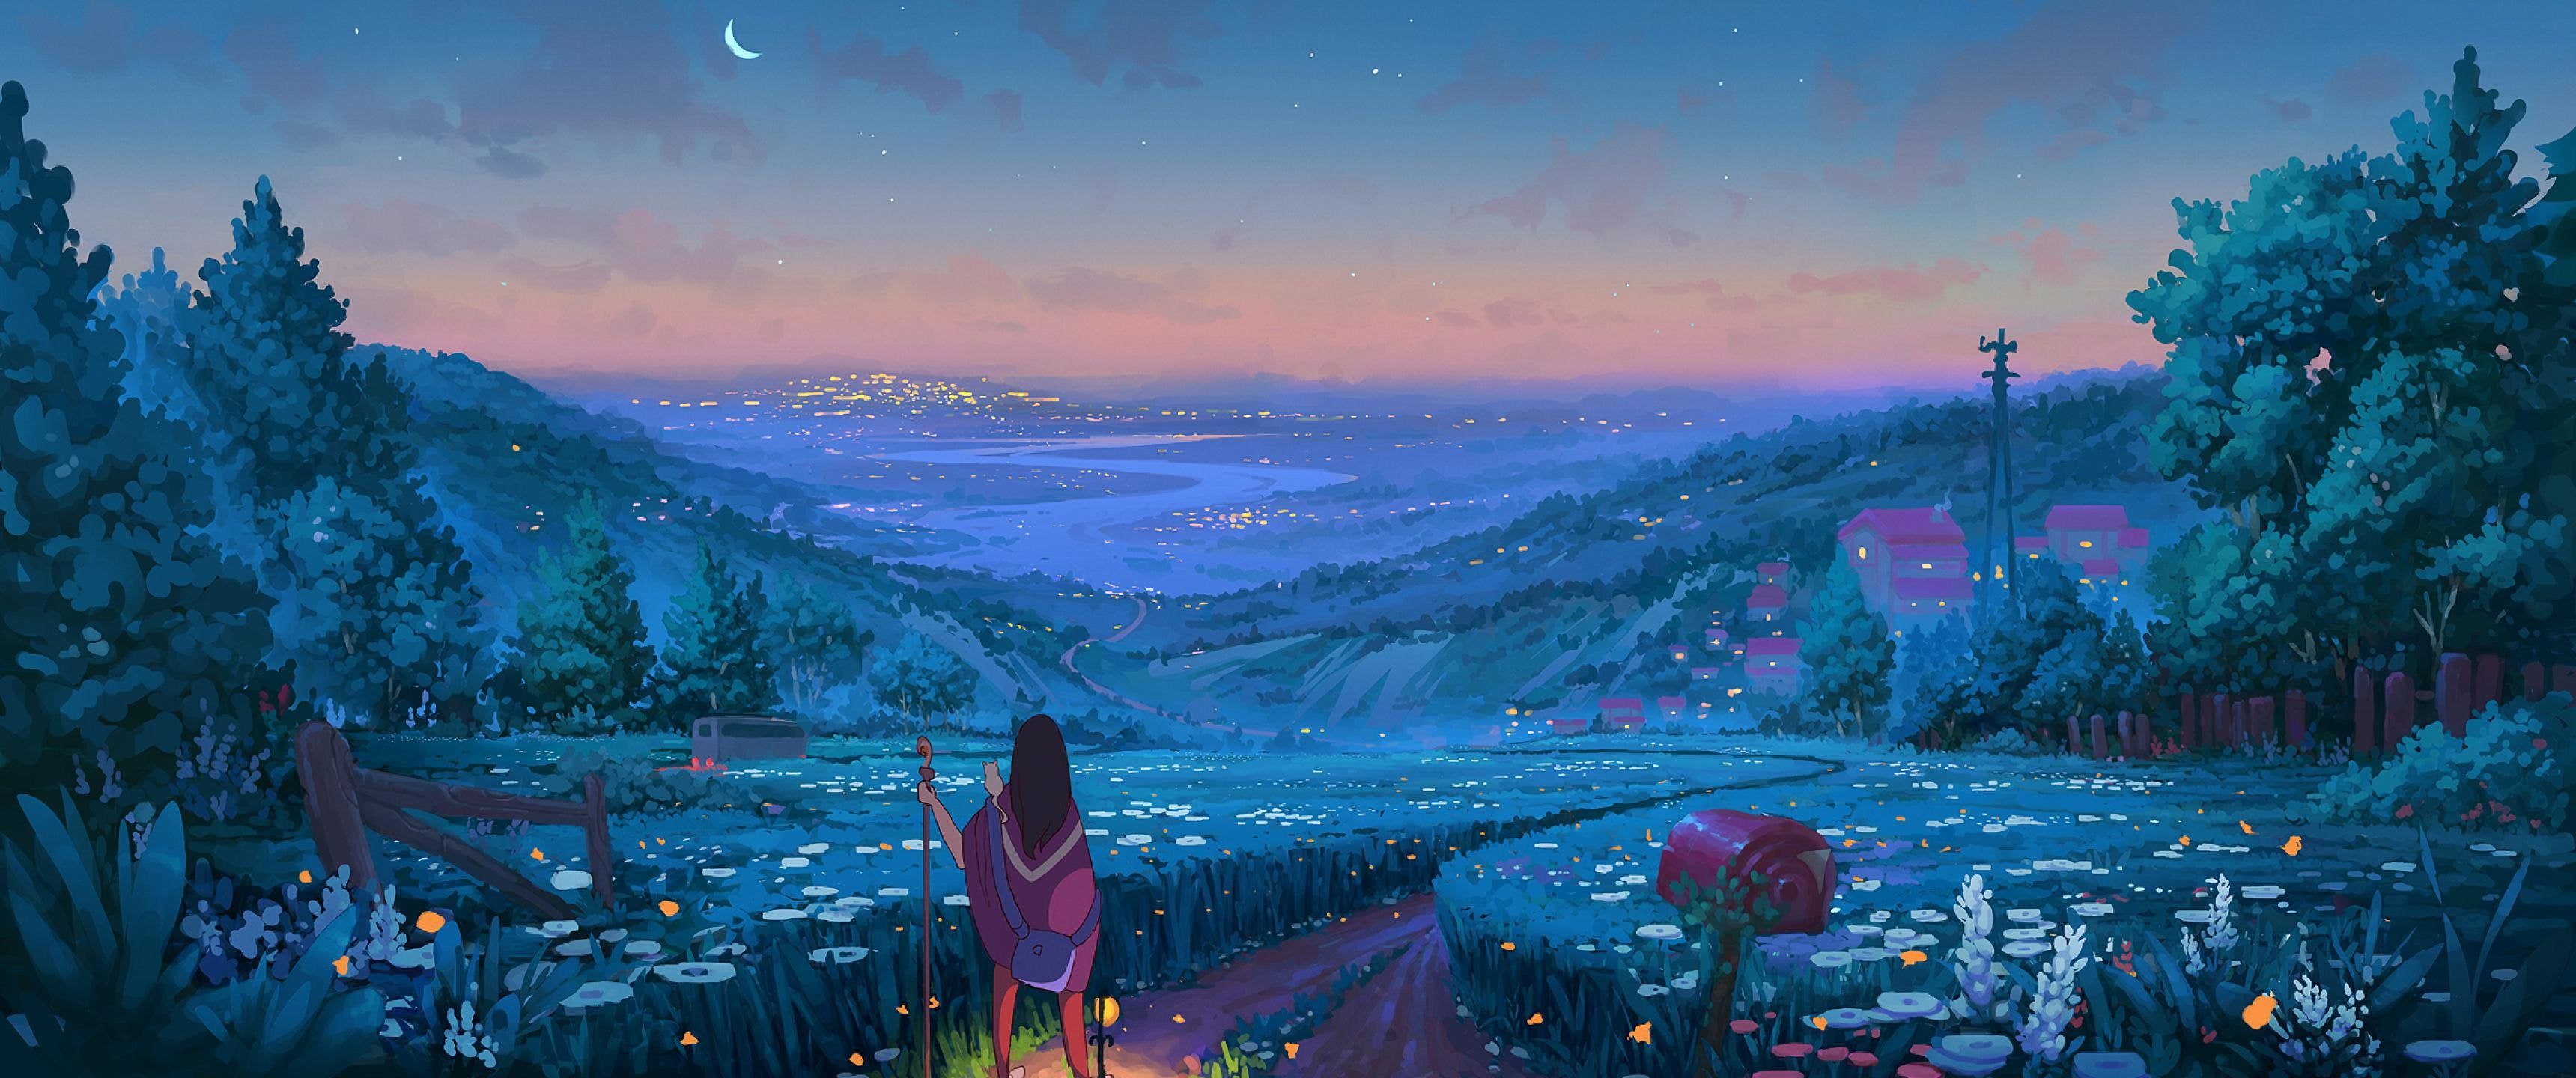 A beautiful anime landscape with a girl sitting on a chair in the foreground - 3440x1440